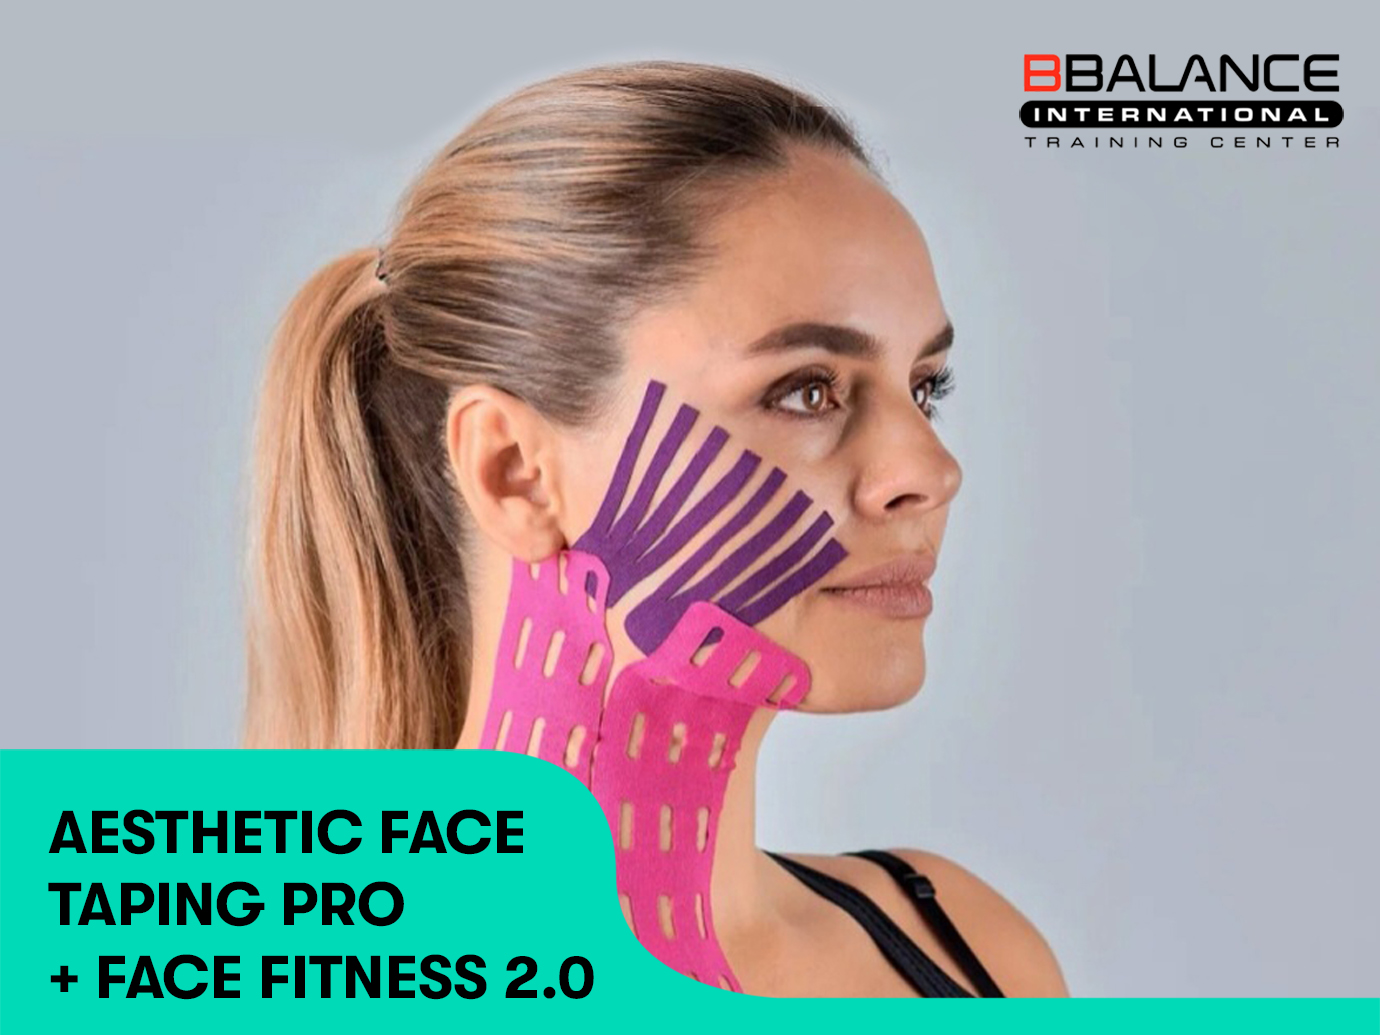 AESTHETIC FACE TAPING PRO + FACE FITNESS 2.0